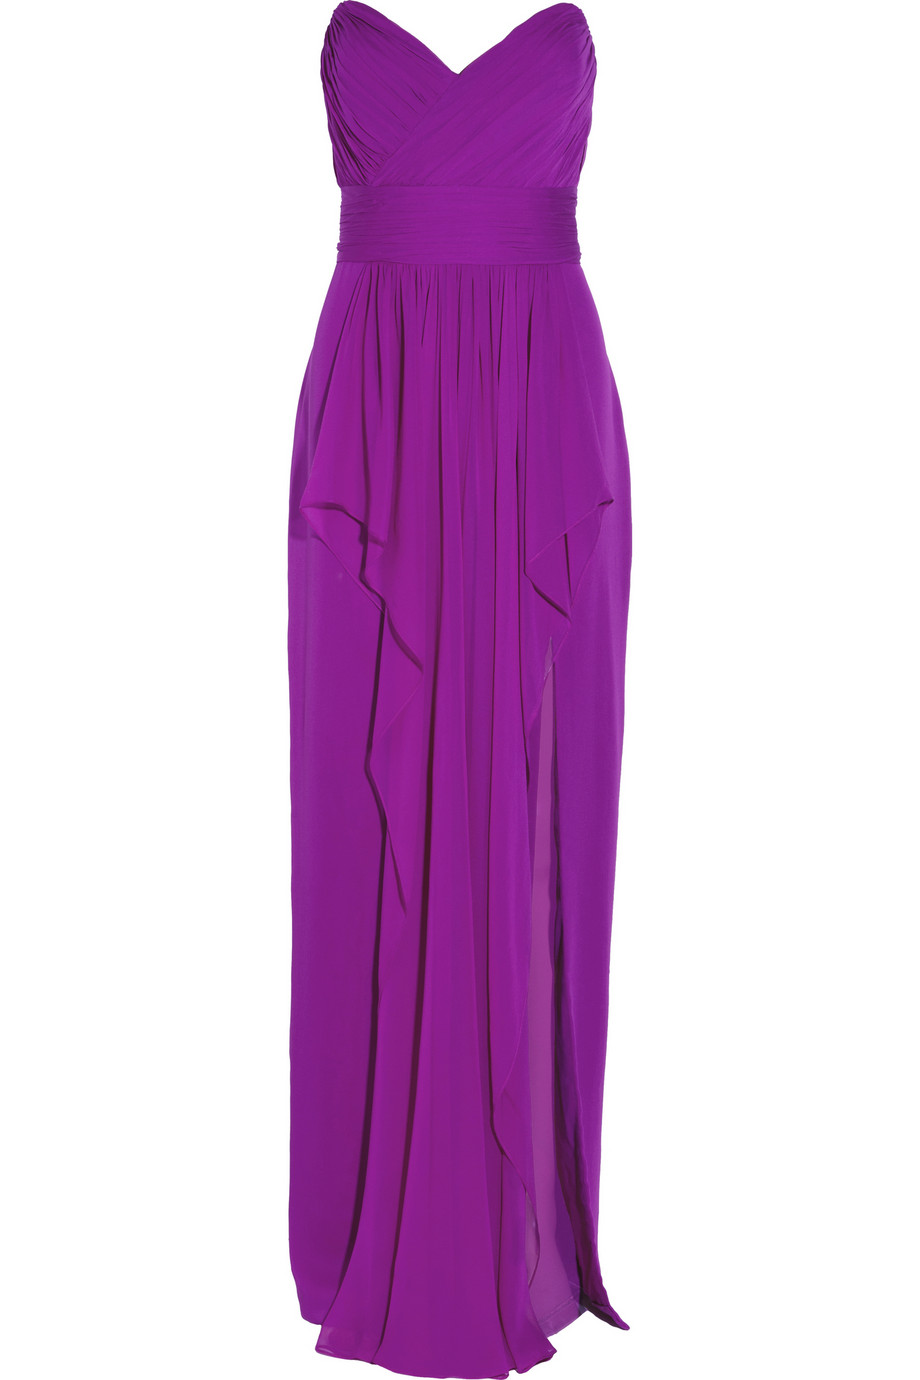 Notte By Marchesa Ruched Silk Chiffon Gown in Purple | Lyst